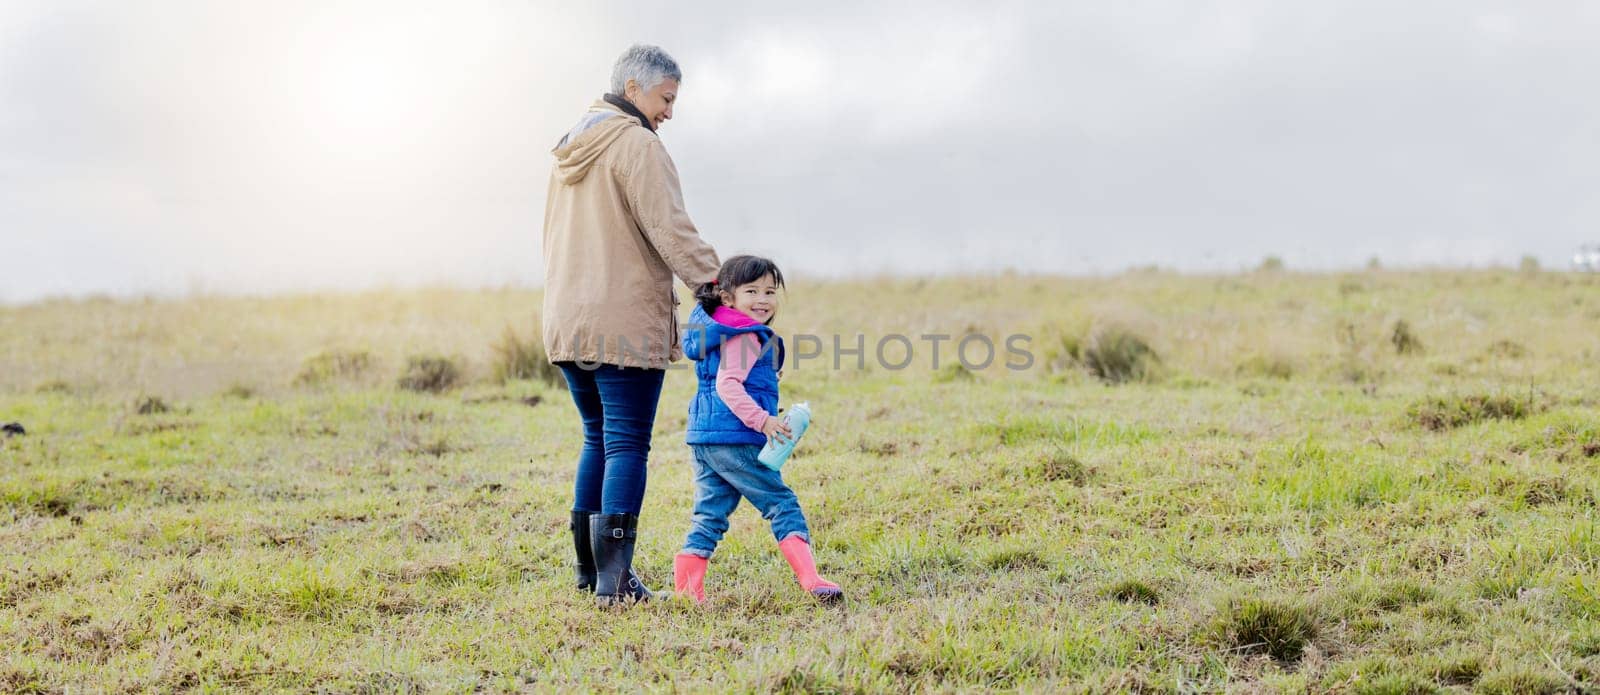 Grandmother, walking girl and nature park of a kid with senior woman in the countryside. Outdoor field, grass and elderly female with child on a family adventure on vacation with happiness and fun.